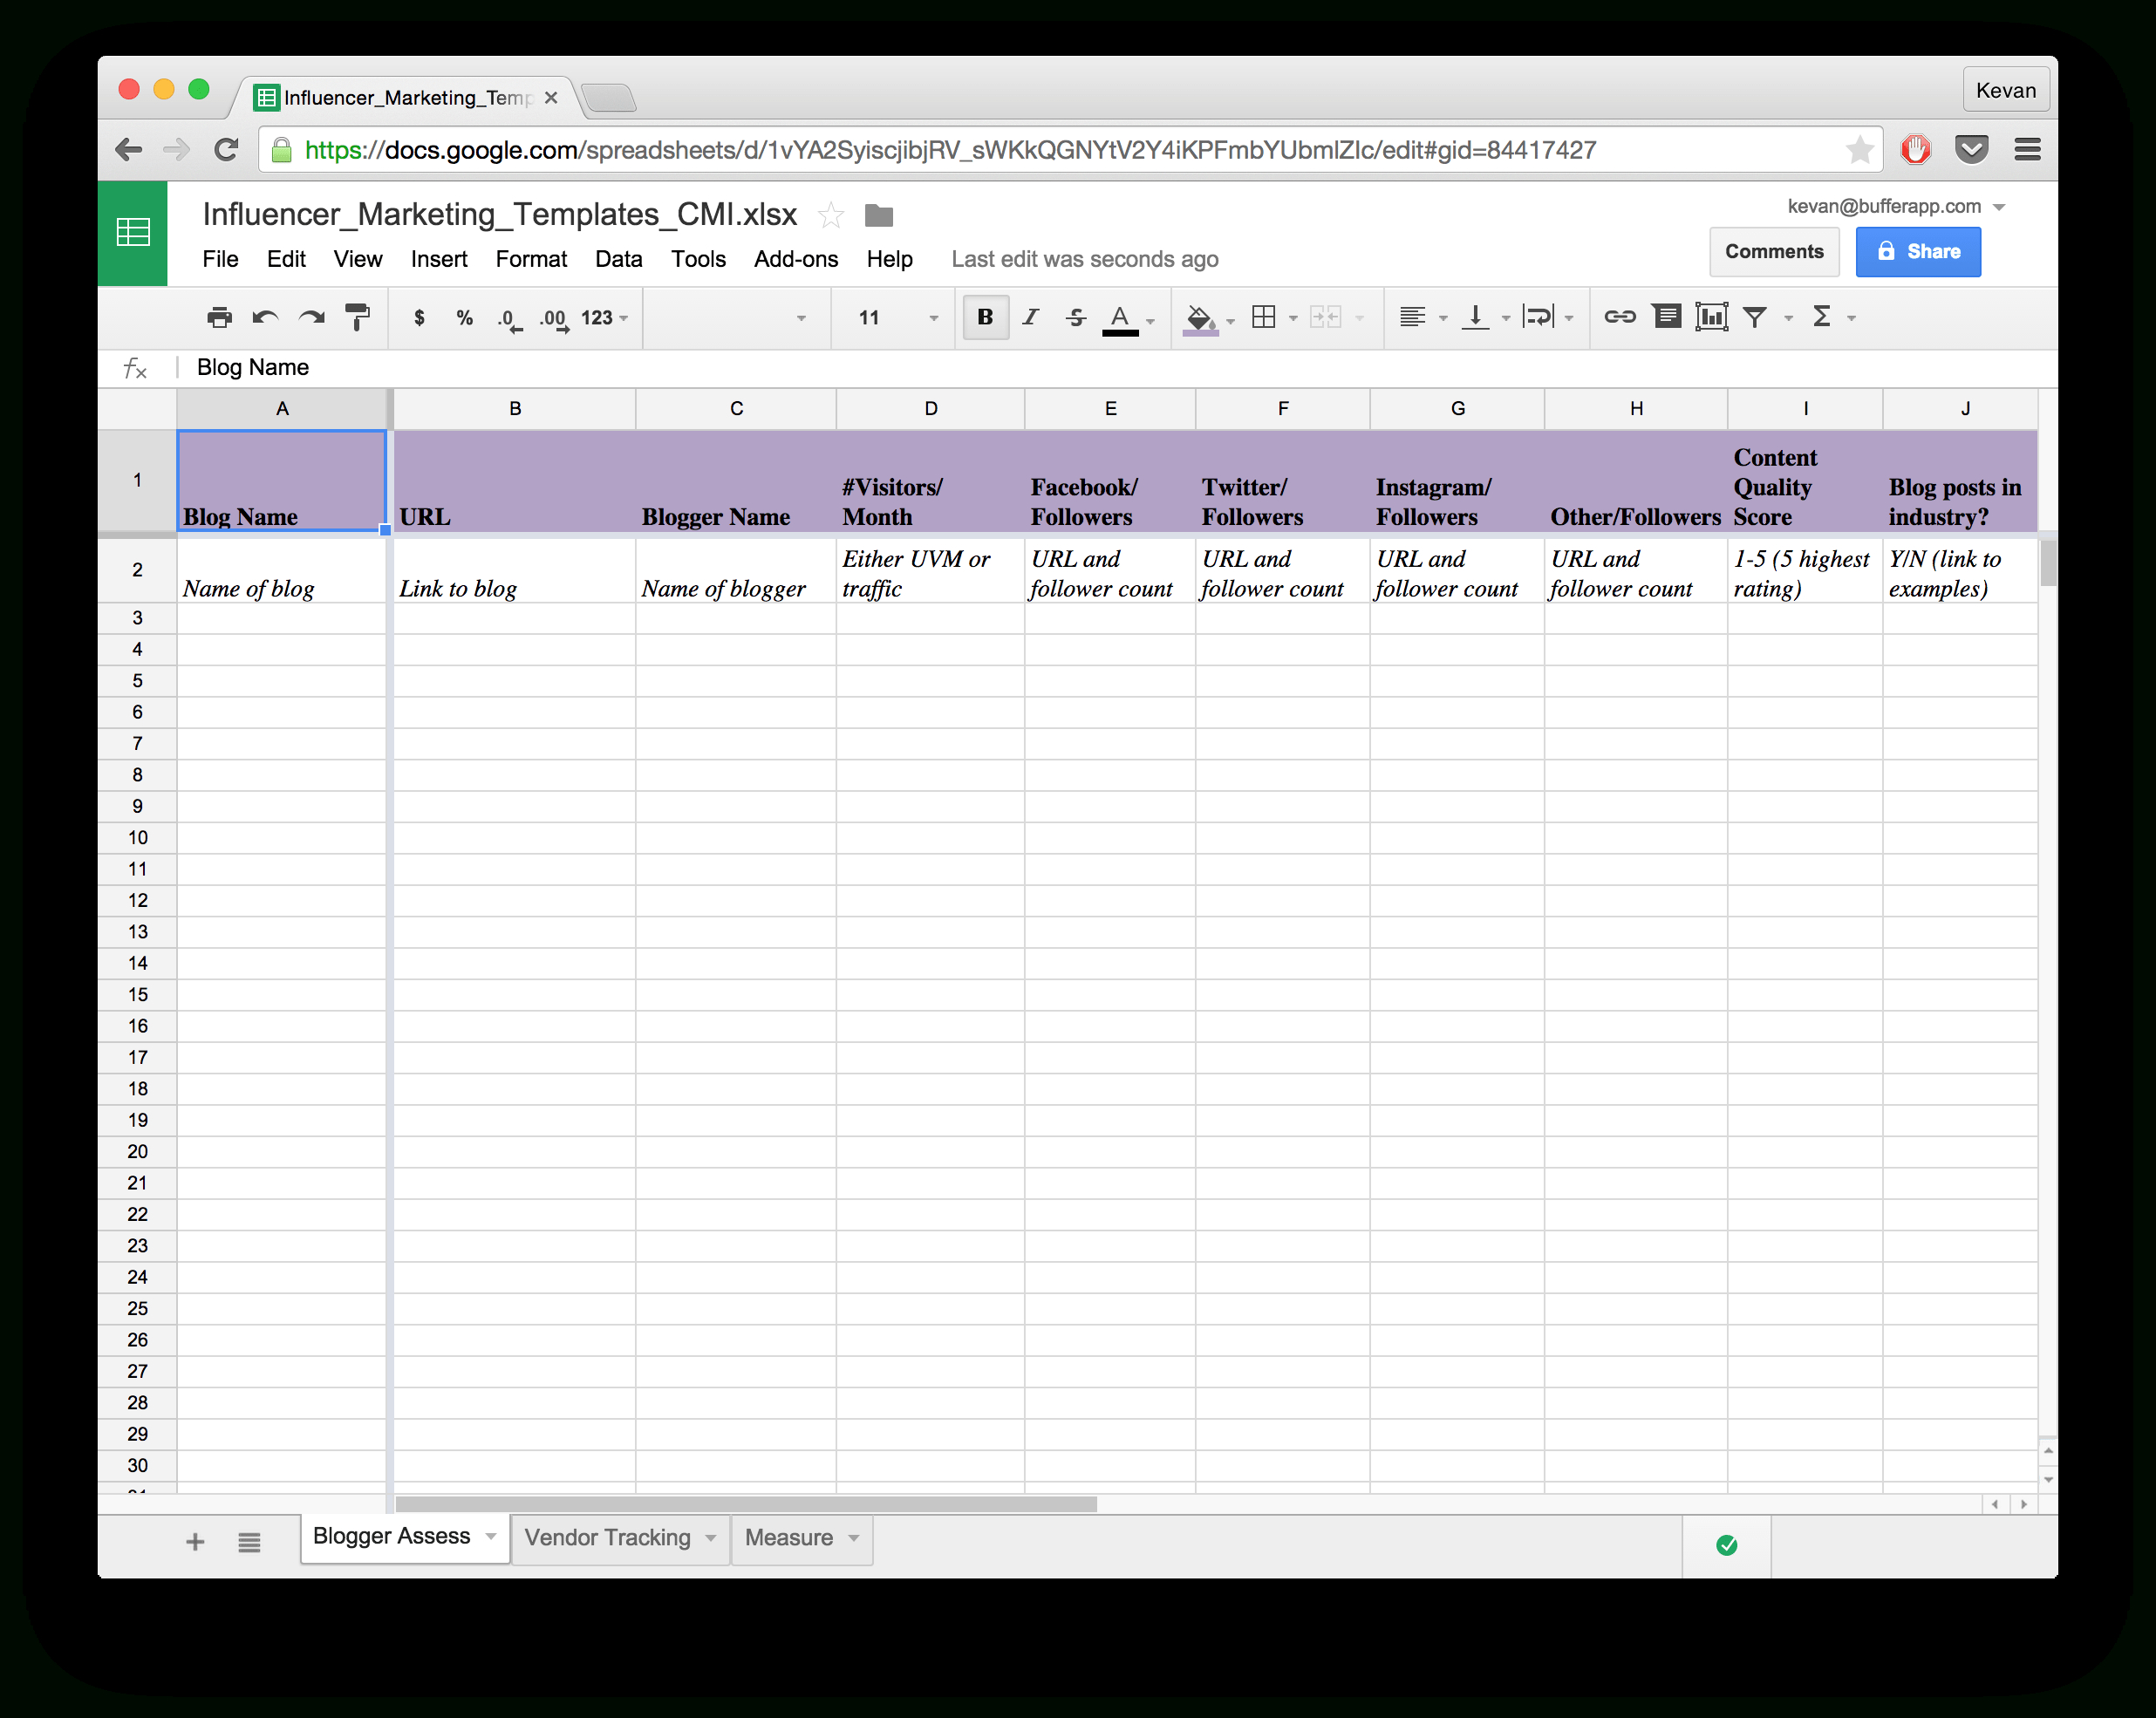 Excel Spreadsheet For Network Marketing Regarding 15 New Social Media Templates To Save You Even More Time